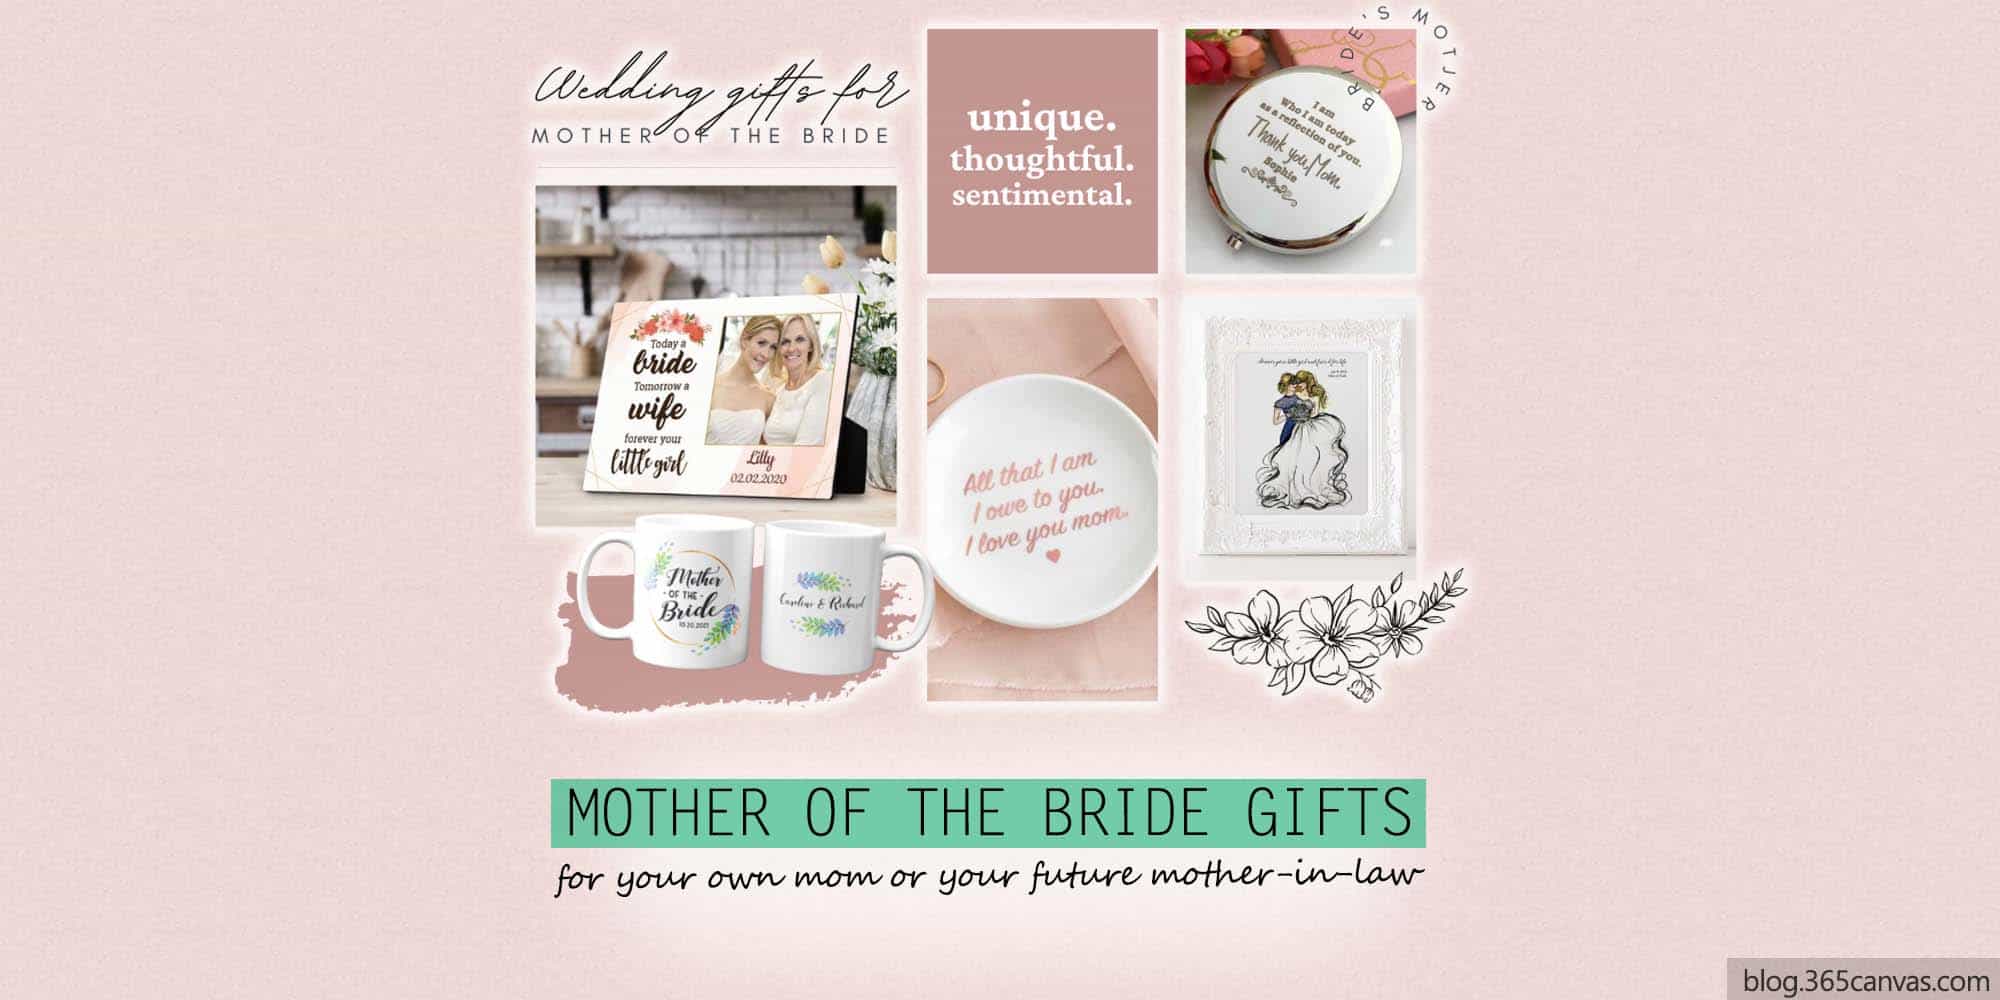 33 Thoughtful Gifts for Mother of The Bride She’ll Love (2022)